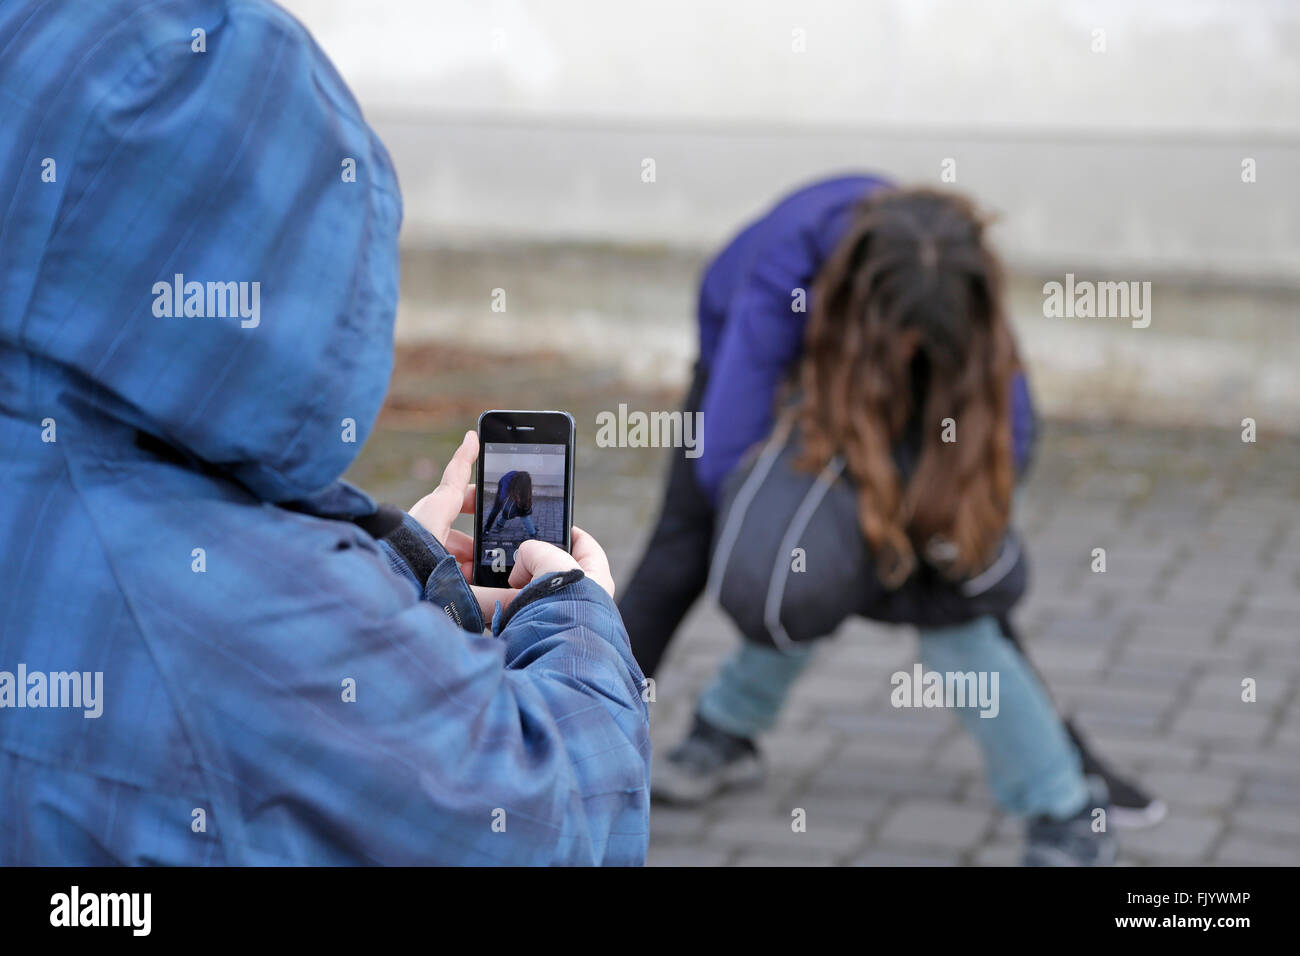 two kids fighting, third one making video with smartphone Stock Photo